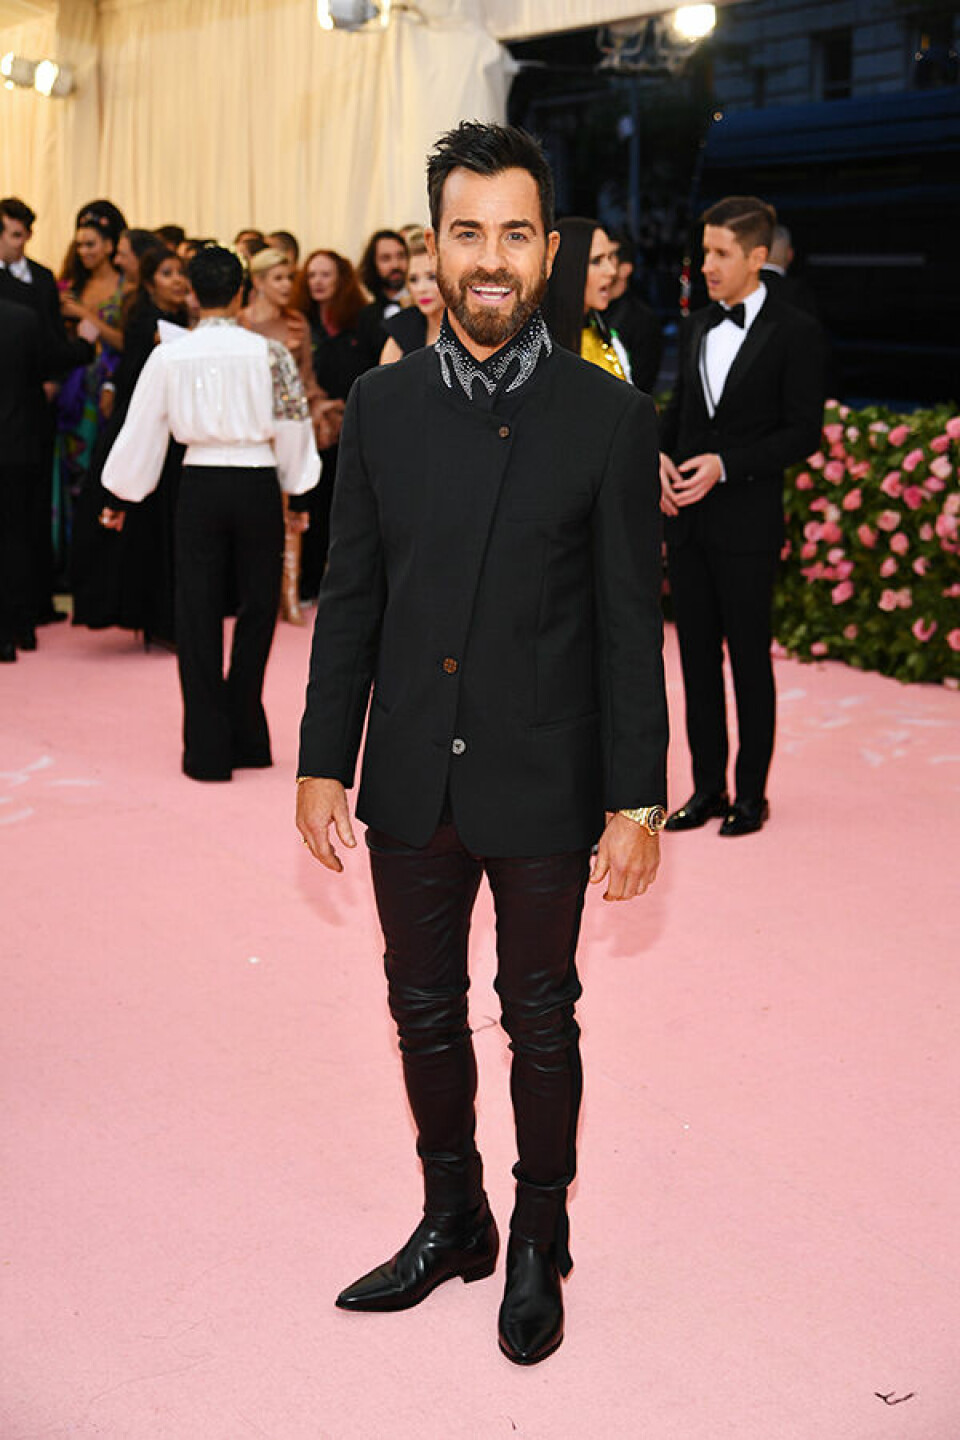 NEW YORK, NEW YORK – MAY 06: Justin Theroux attends The 2019 Met Gala Celebrating Camp: Notes on Fashion at Metropolitan Museum of Art on May 06, 2019 in New York City. (Photo by Dimitrios Kambouris/Getty Images for The Met Museum/Vogue)